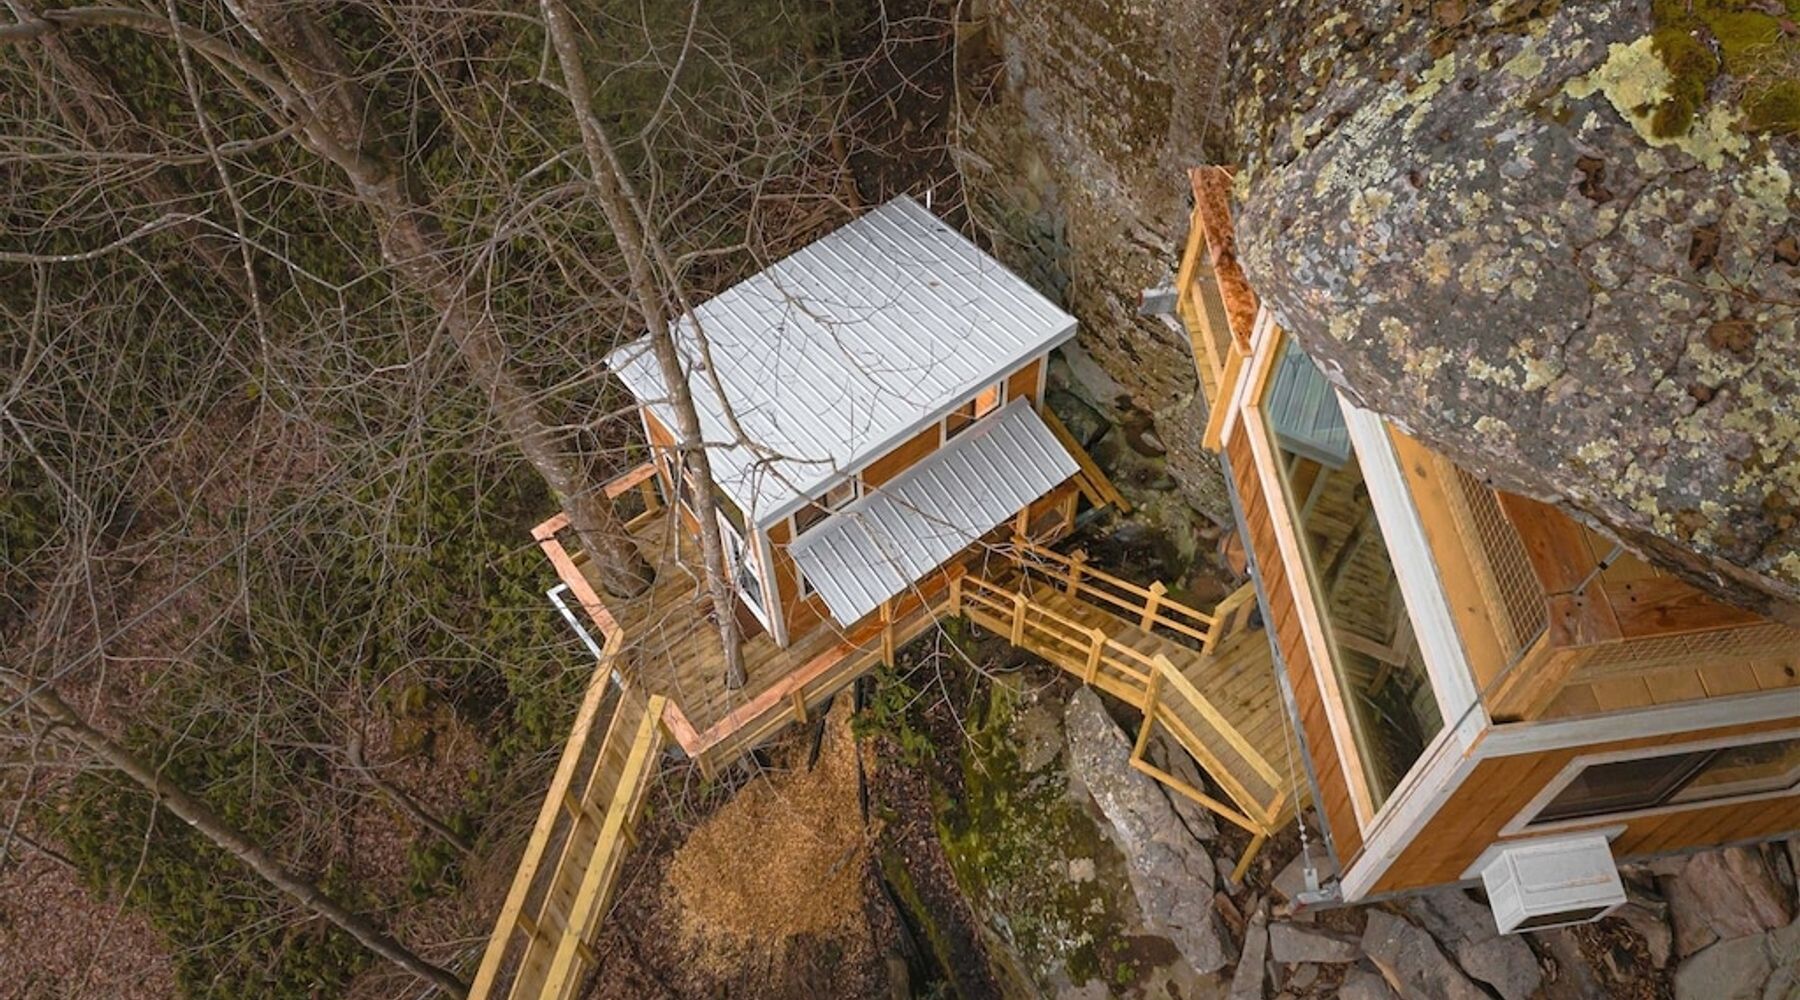 The Best Treehouses In The US

3. Cliff Dweller: Spend a night Suspended from the Ridgeline!

Location: Campton, Kentucky